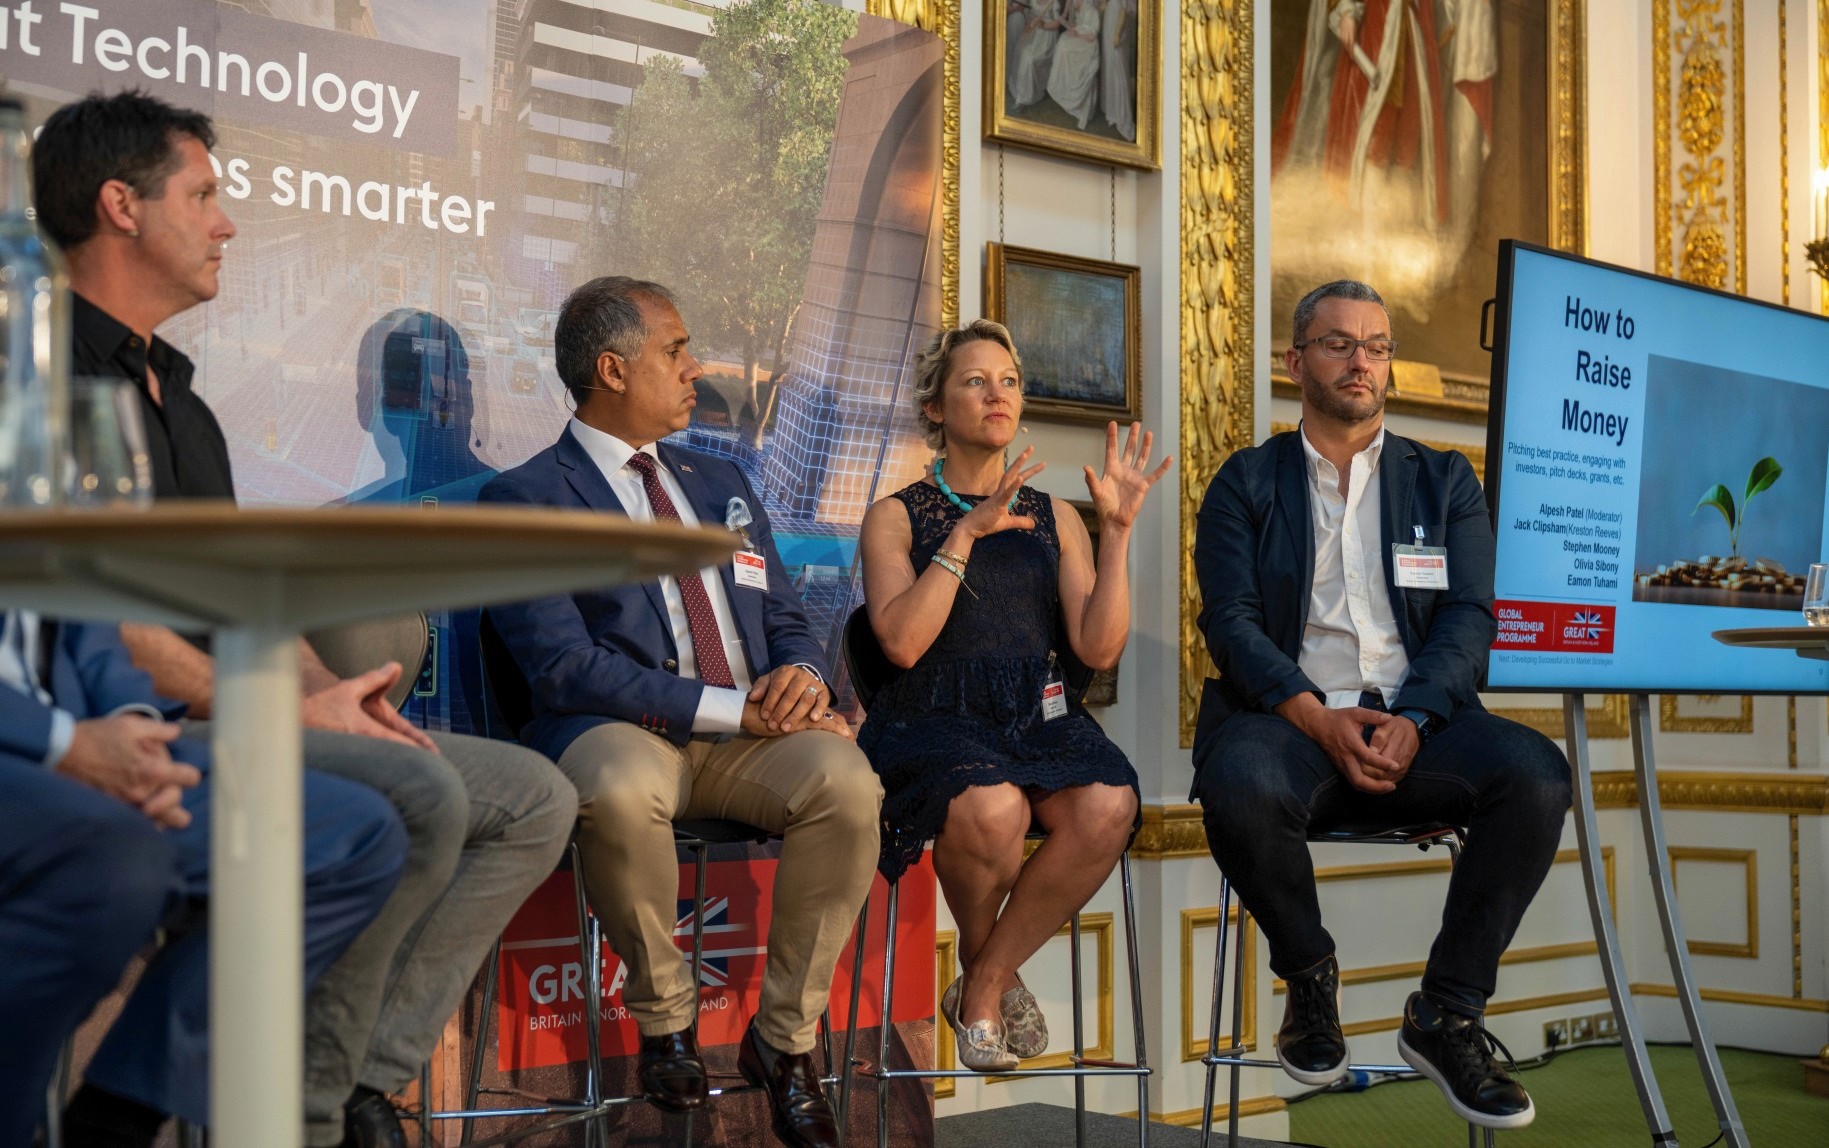 GEP Dealmakers Stephen Mooney (left), Alpesh Patel (middle left), Liv Sibony (Middle Right) and Eamon Tuhami (right) during the 'How to Raise Money' session - June 2022